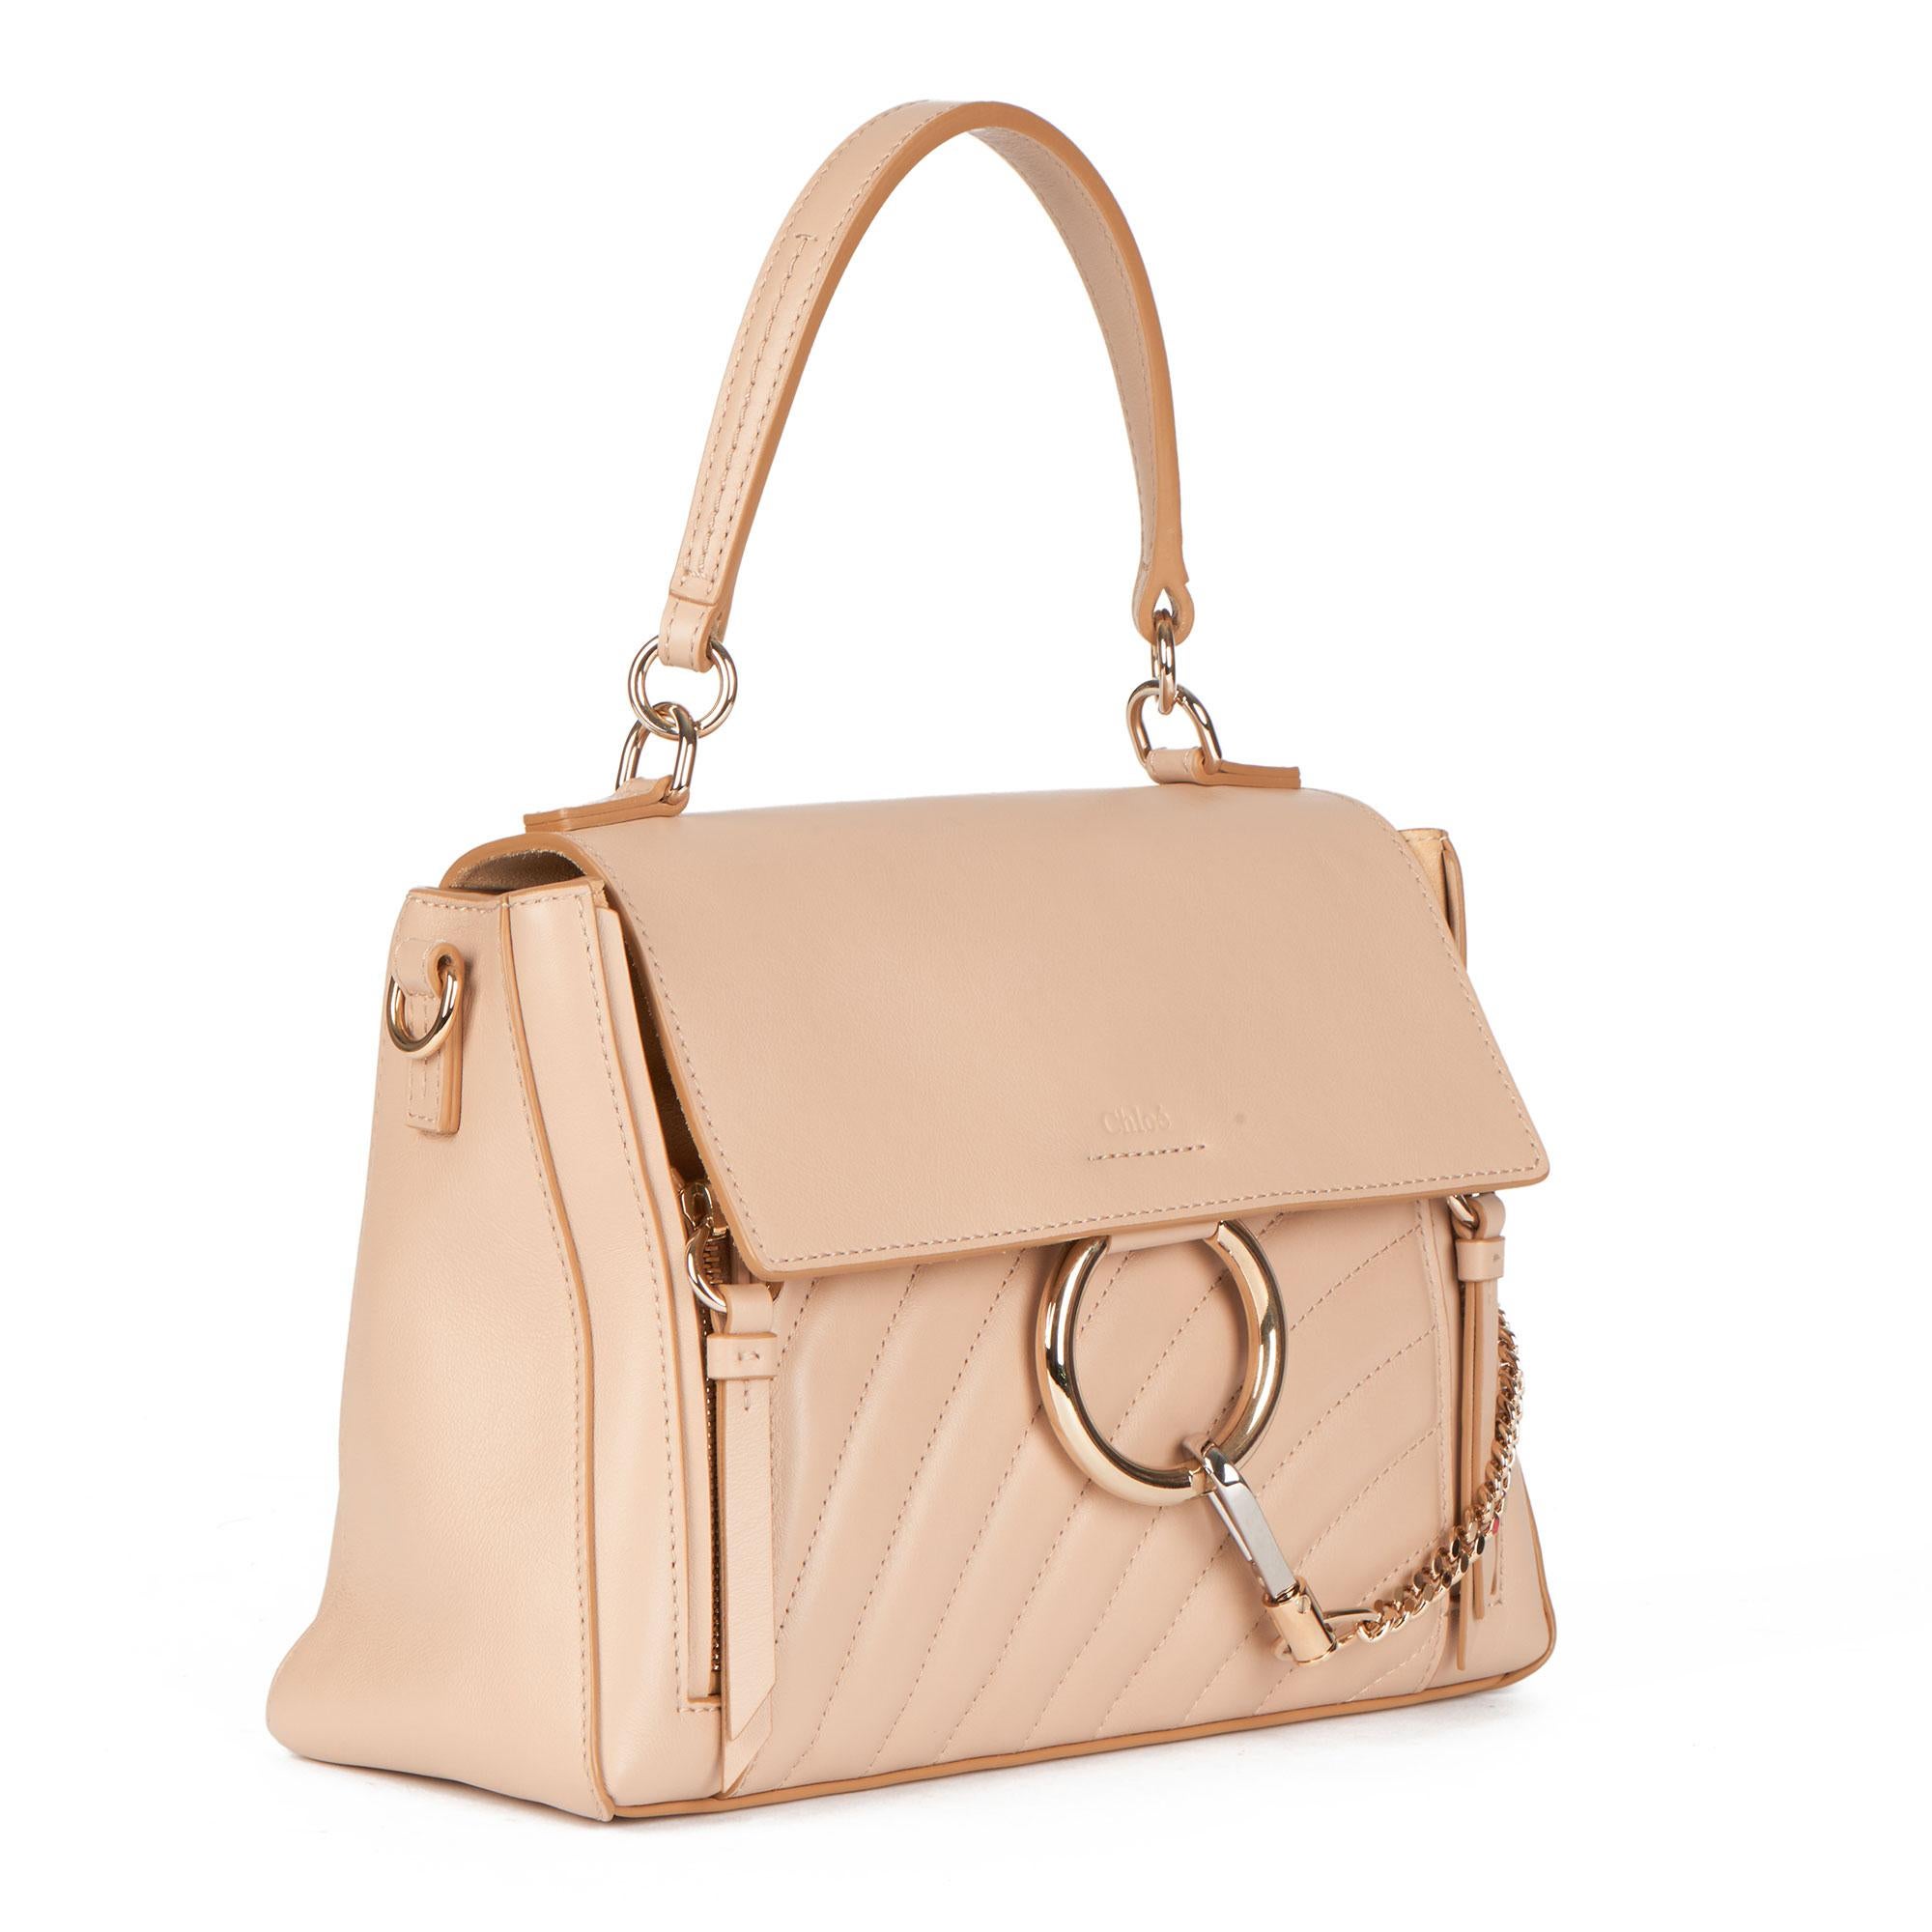 CHLOÉ
Beige Quilted Calfskin Leather & Suede Small Faye Day Bag

Xupes Reference: CB379
Serial Number: C0V3J4
Age (Circa): 2021
Accompanied By: Chloé Dust Bag, Shoulder Strap
Authenticity Details: Date Stamp (Made in Italy)
Gender: Ladies
Type: Top